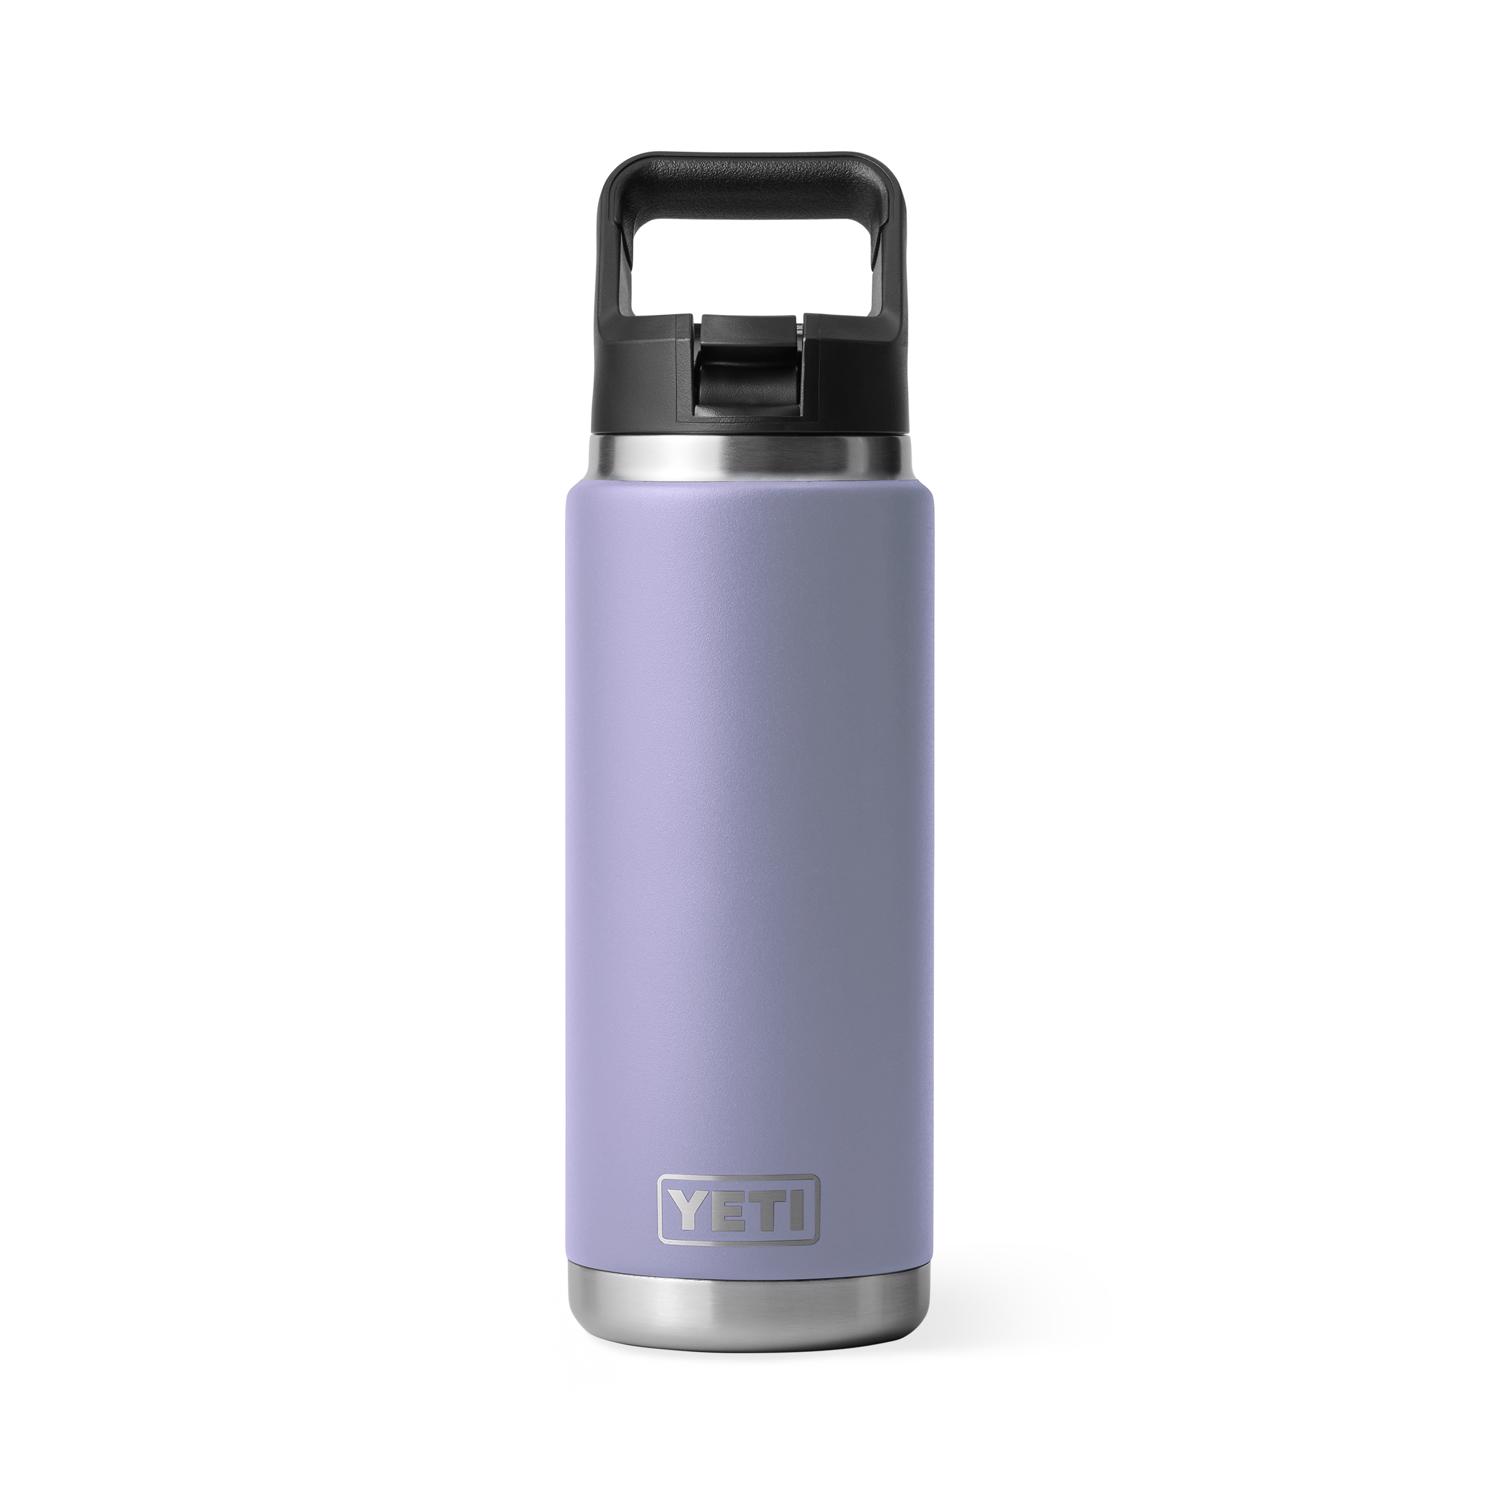 Photos - Other Accessories Yeti Rambler 26 oz Cosmic Lilac BPA Free Bottle with Straw Cap 21071501910 